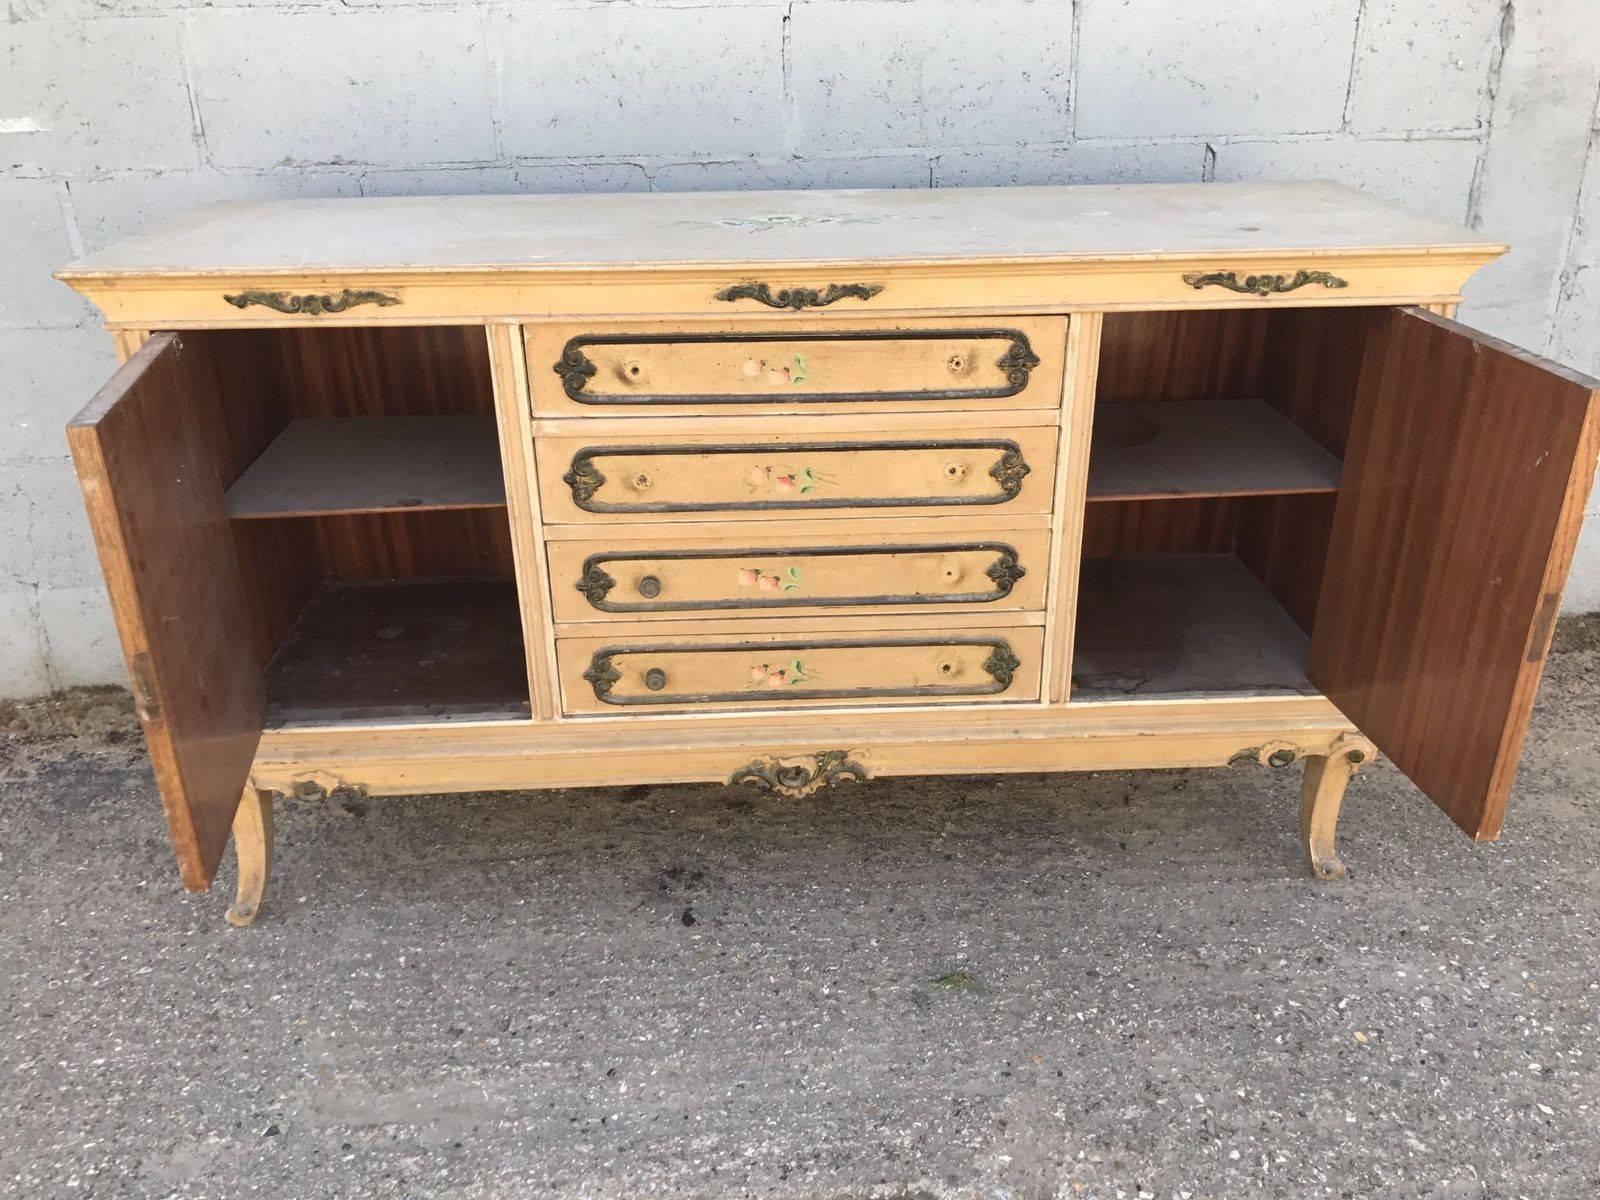 Original Vintage Painted French Sideboard/Drawers, Antique, Rare For Sale 2